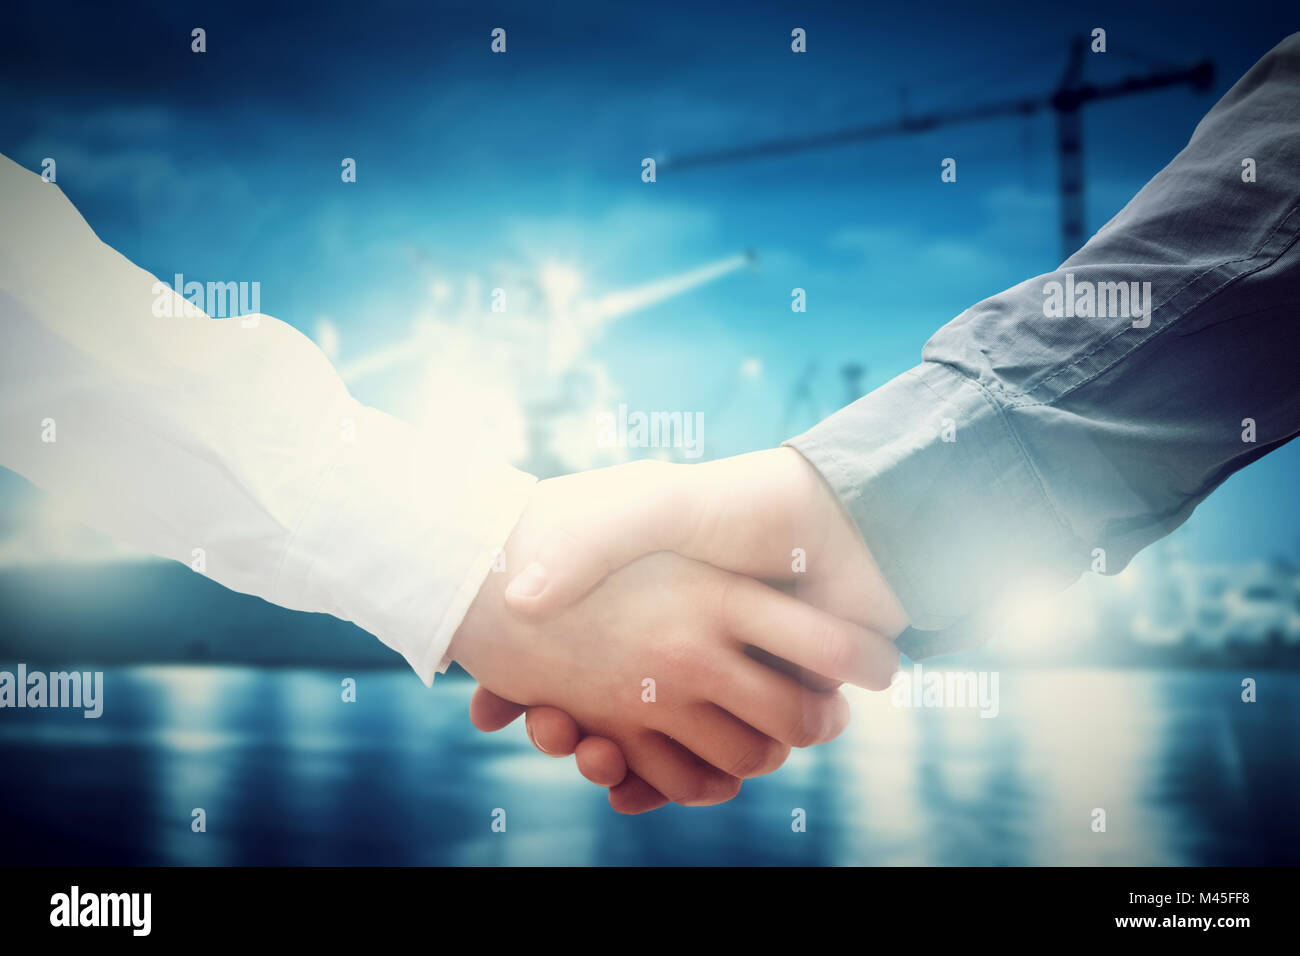 Business handshake in shipyard. Industry, deal, contract. Stock Photo